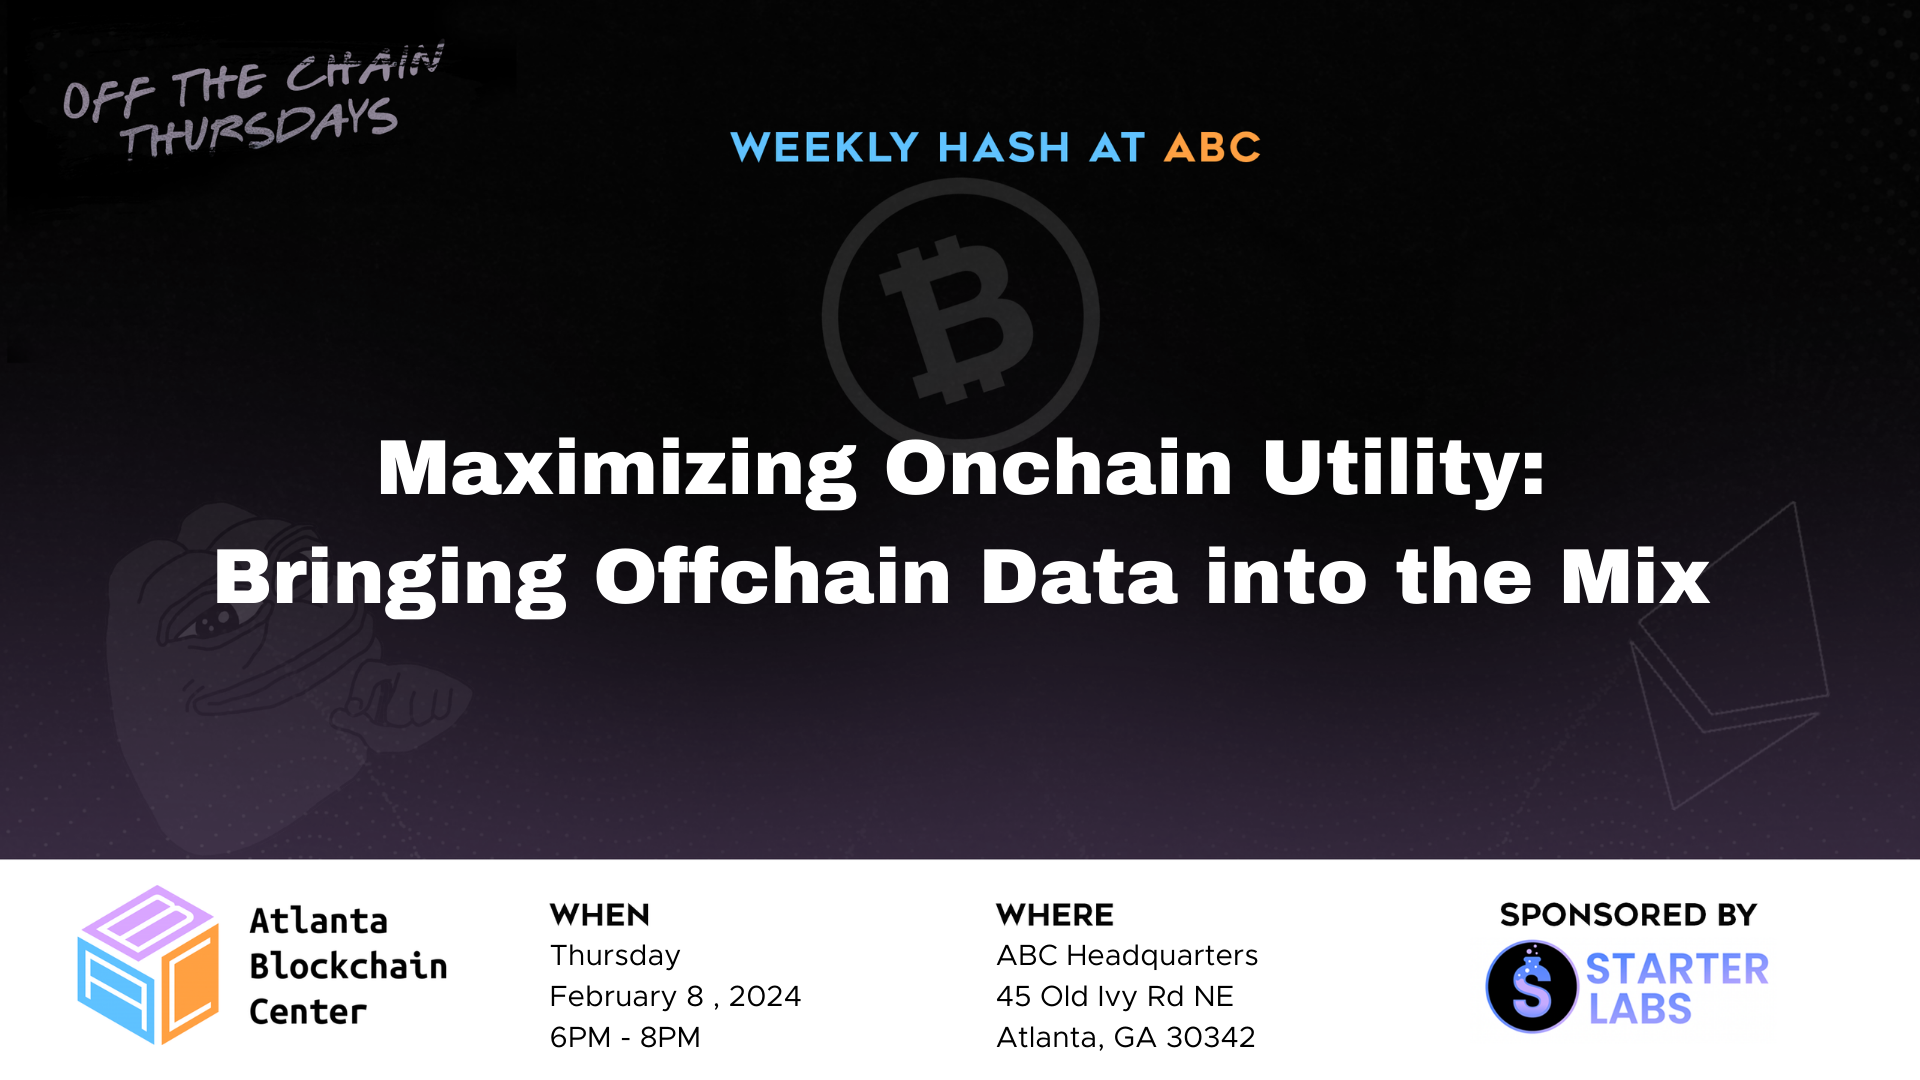 Maximizing Onchain Utility: Bringing Offchain Data into the Mix